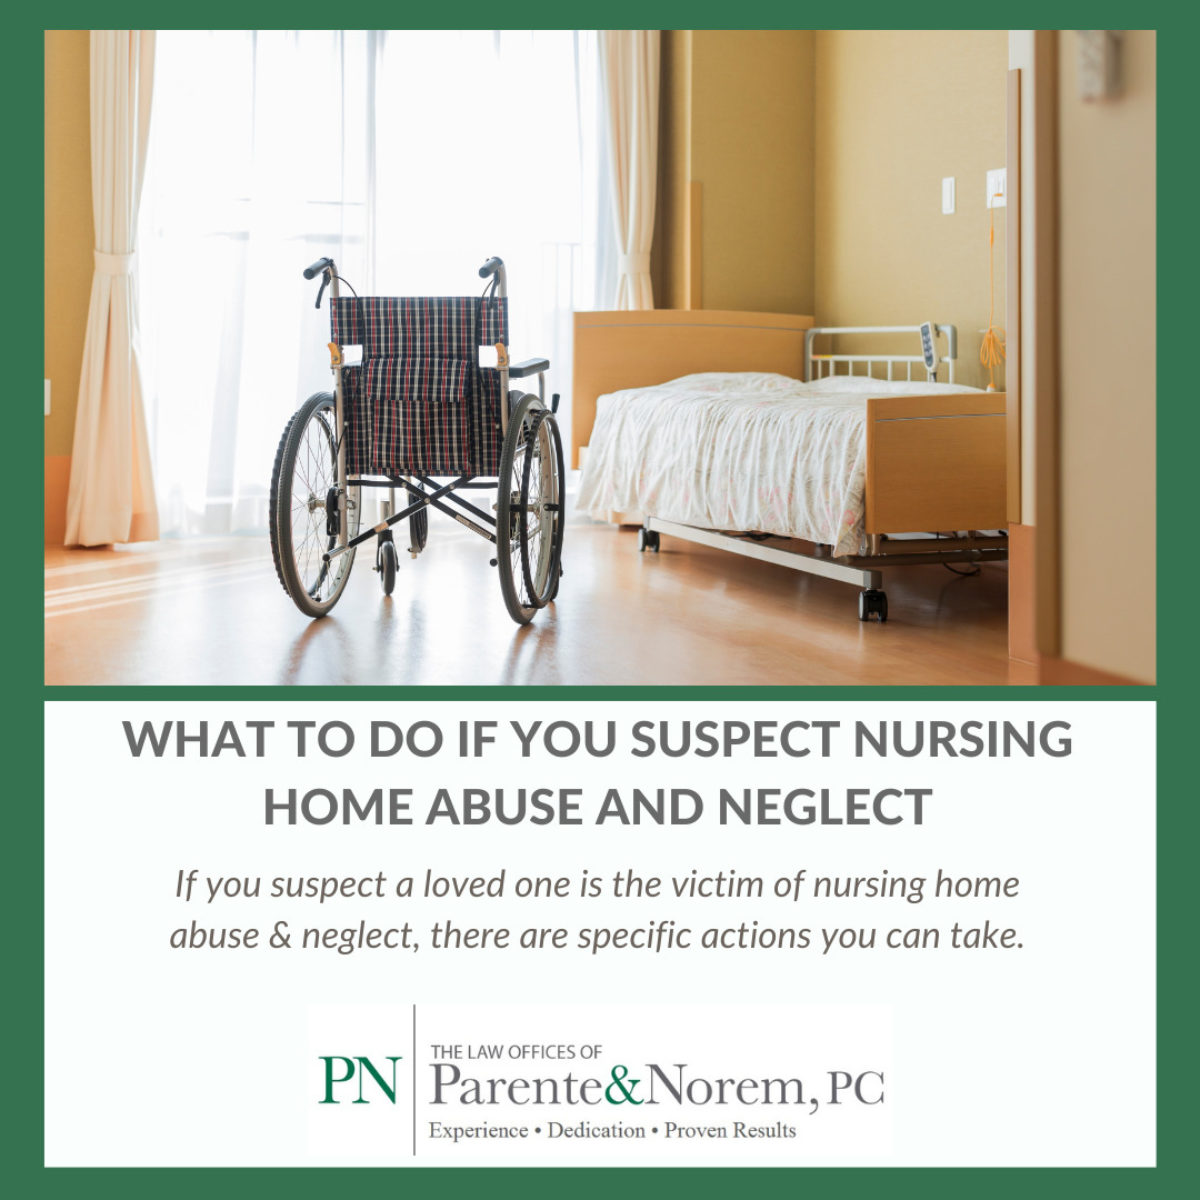 P&N BLOG | What To Do If You Suspect a Loved One is the Victim of Nursing Home Abuse & Neglect